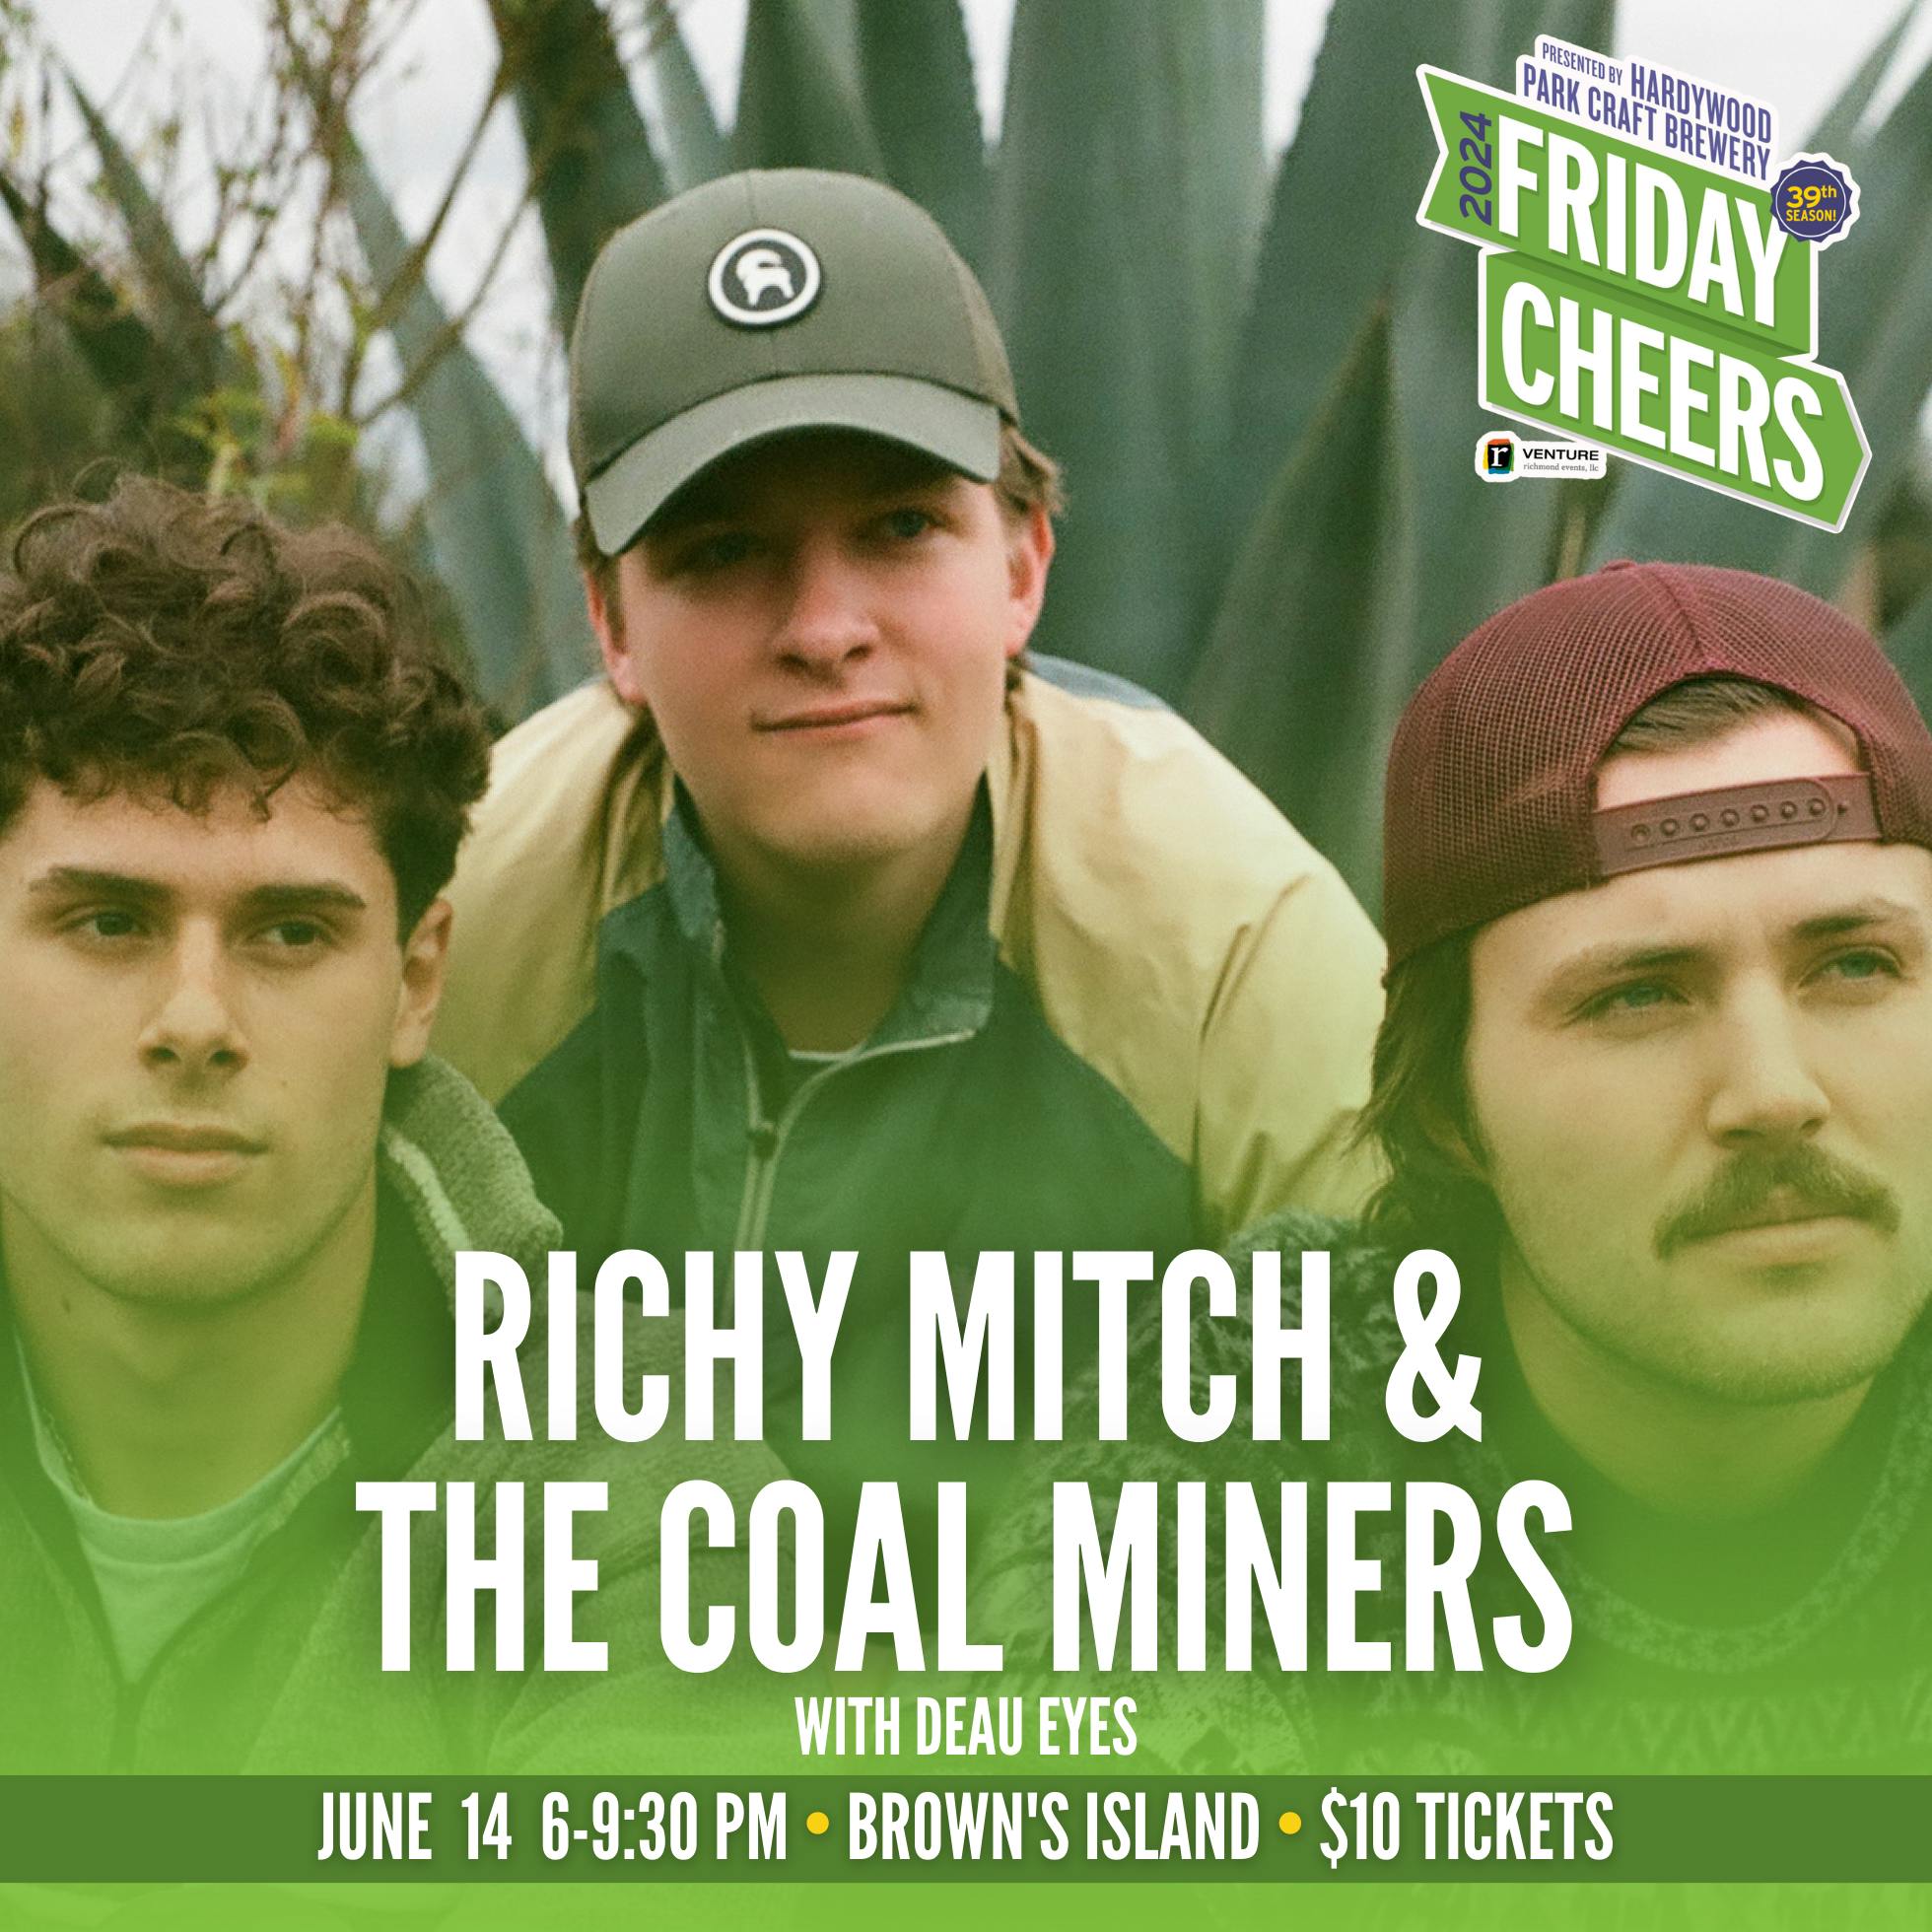 Richy Mitch & the Coalminers with Deau Eyes